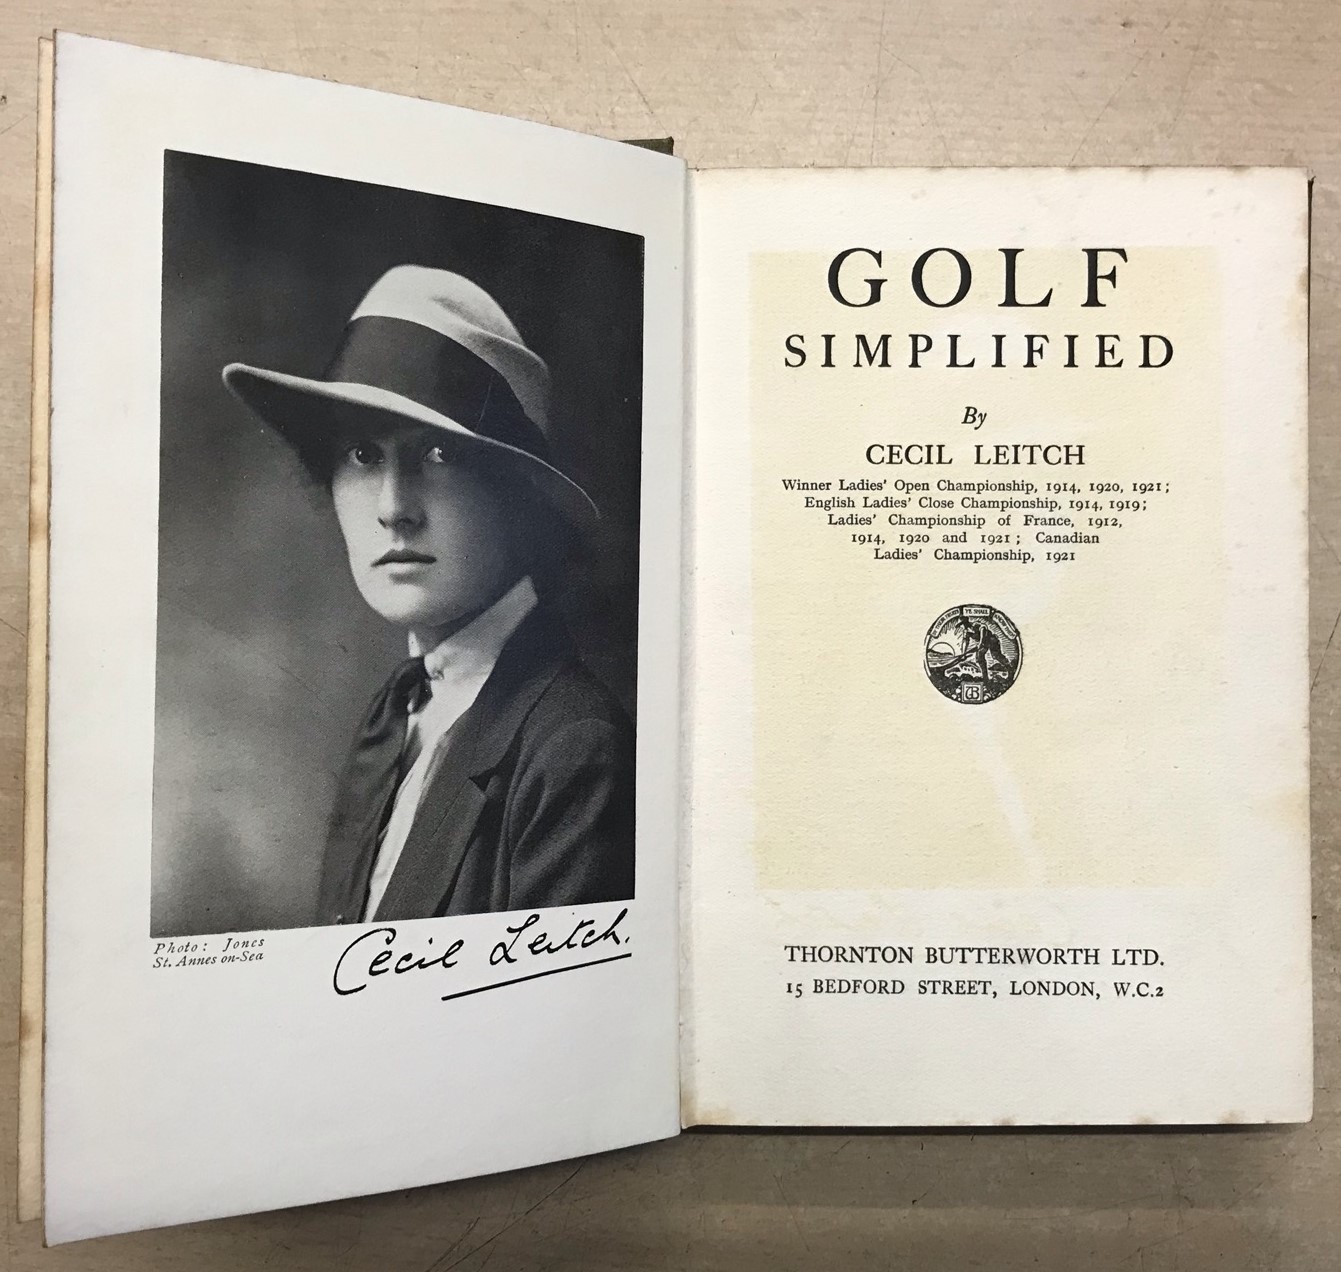 Golf Simplified Hardcover 1924 by Cecil Leitch "Winner Ladies' Open Championships 1914, 1920, 1921…"